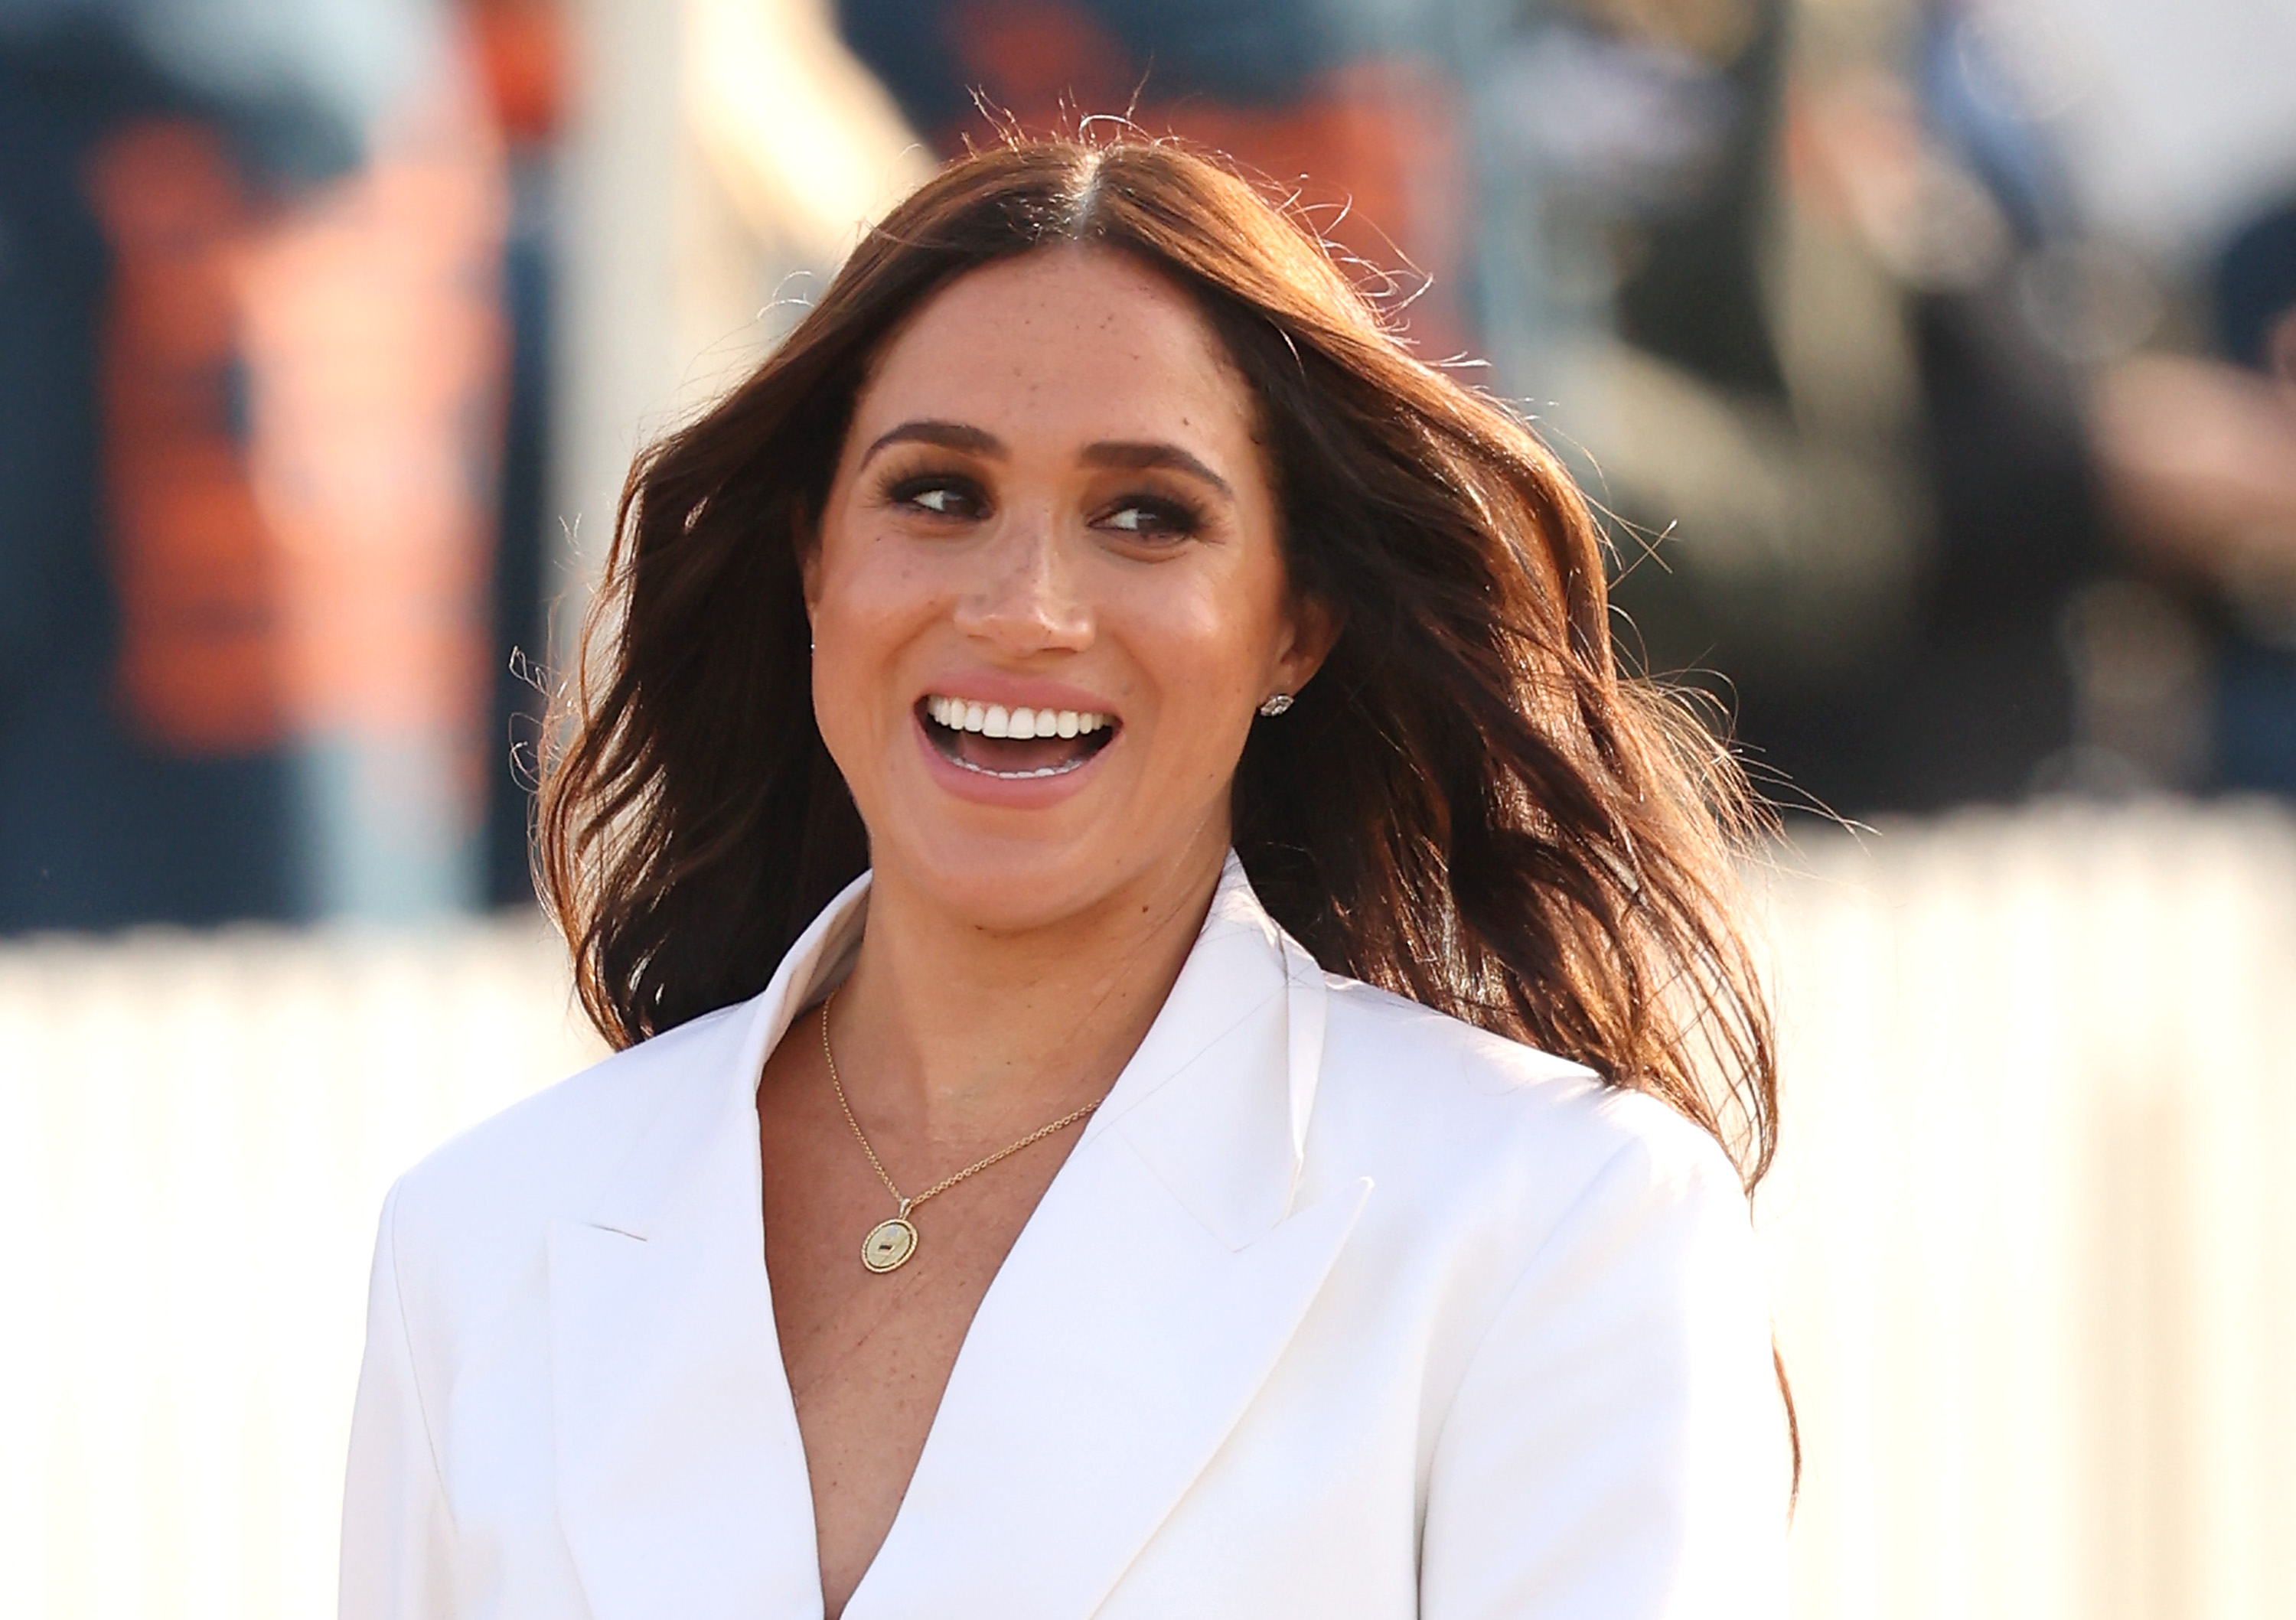 Meghan Markle ‘Simply Can’t Win’ According to Royal Commentator